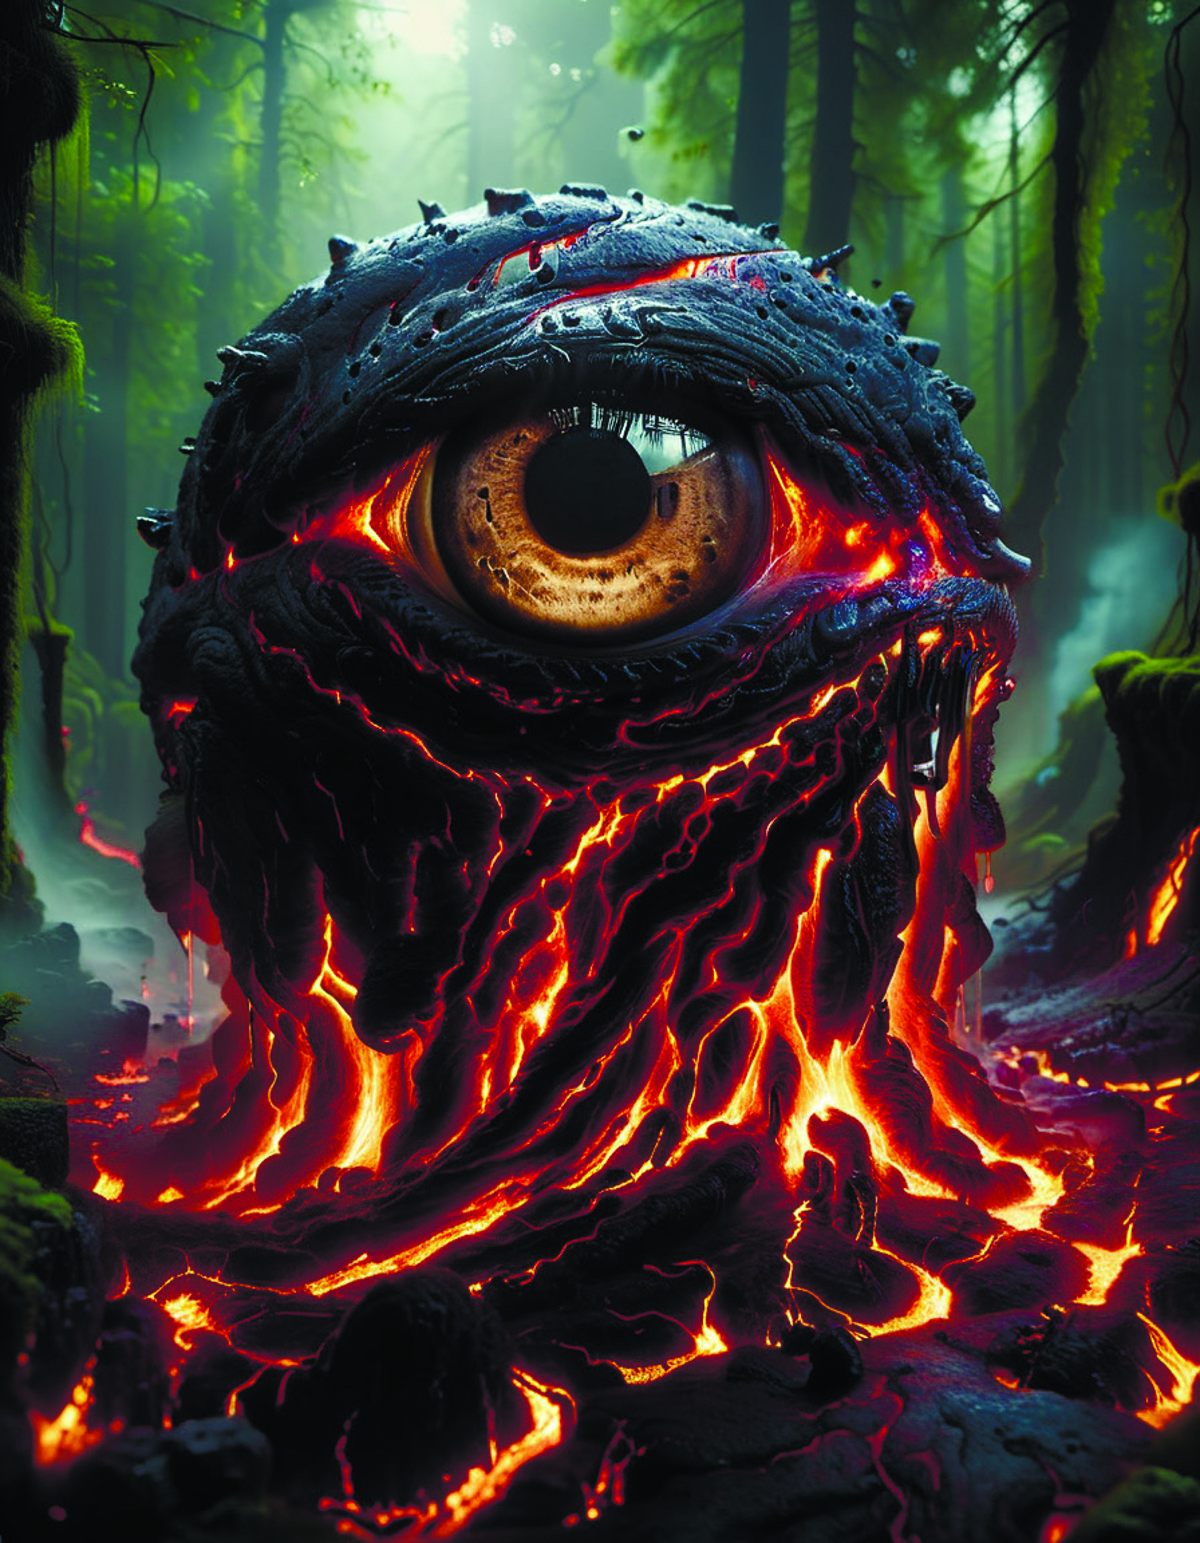 An Eye with a Fire Background and a Tree Stump, Artistic 3D Rendering of a Dragon Eye